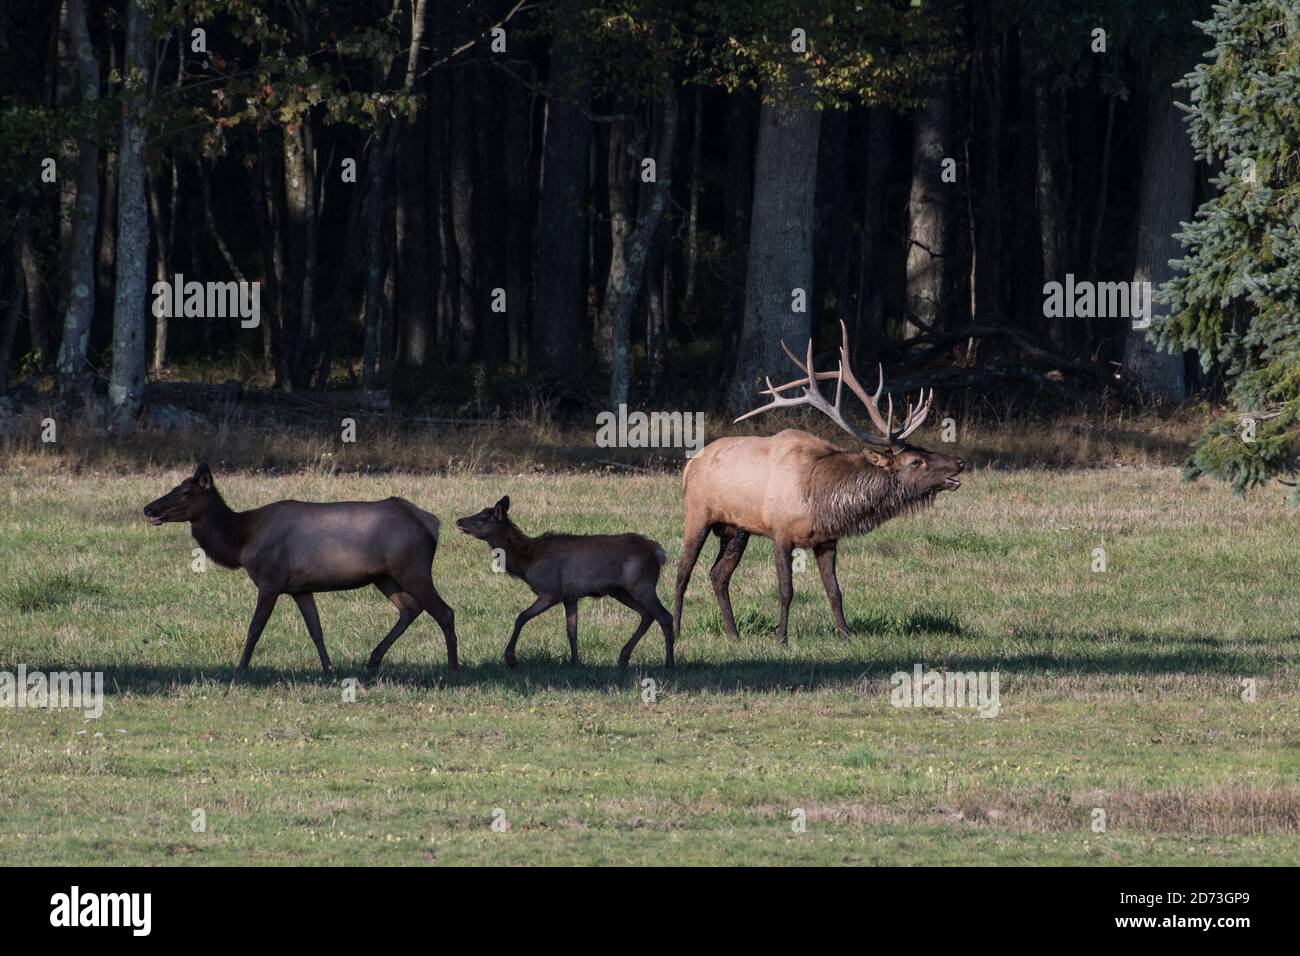 A bull elk bugles while a cow and yearling walk by, Benzette, Pennsylvania, USA Stock Photo